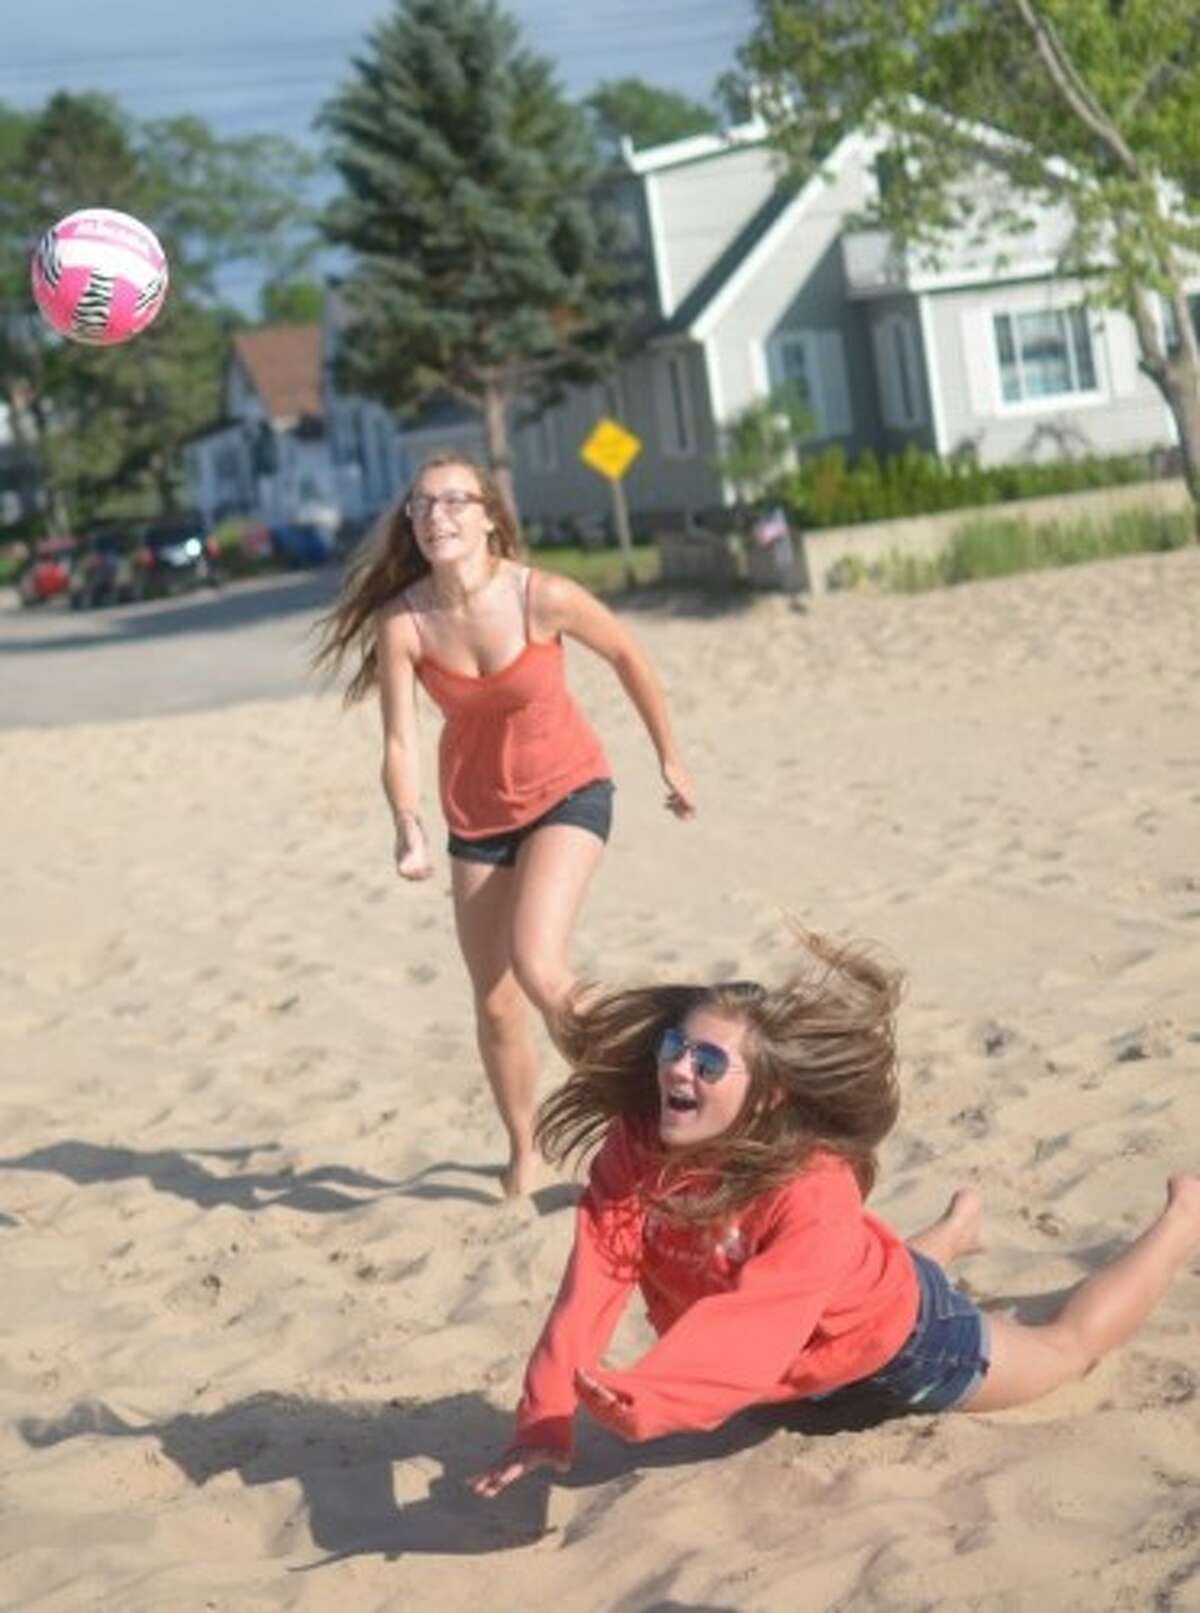 Devon Edmondson, 15, of Manistee, runs for the volleyball while Katie Sidor, 13, of Bear Lake, dives for it. (David Navadeh/News Advocate)